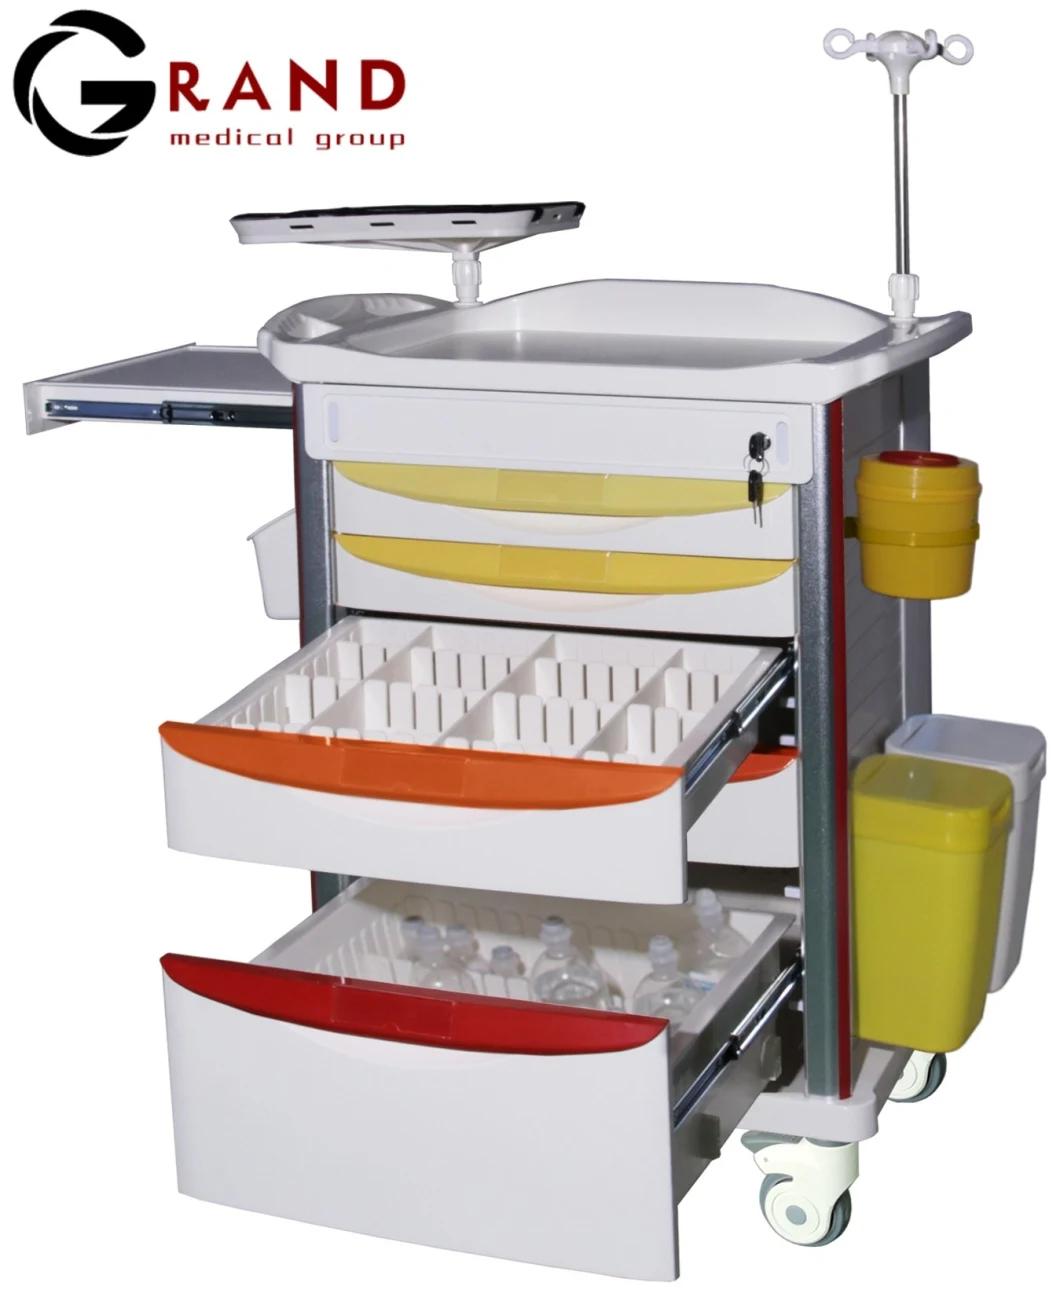 Popular Cheap ABS Surgical Material Hospital Trolley Medical Cart with Drawers on Sale